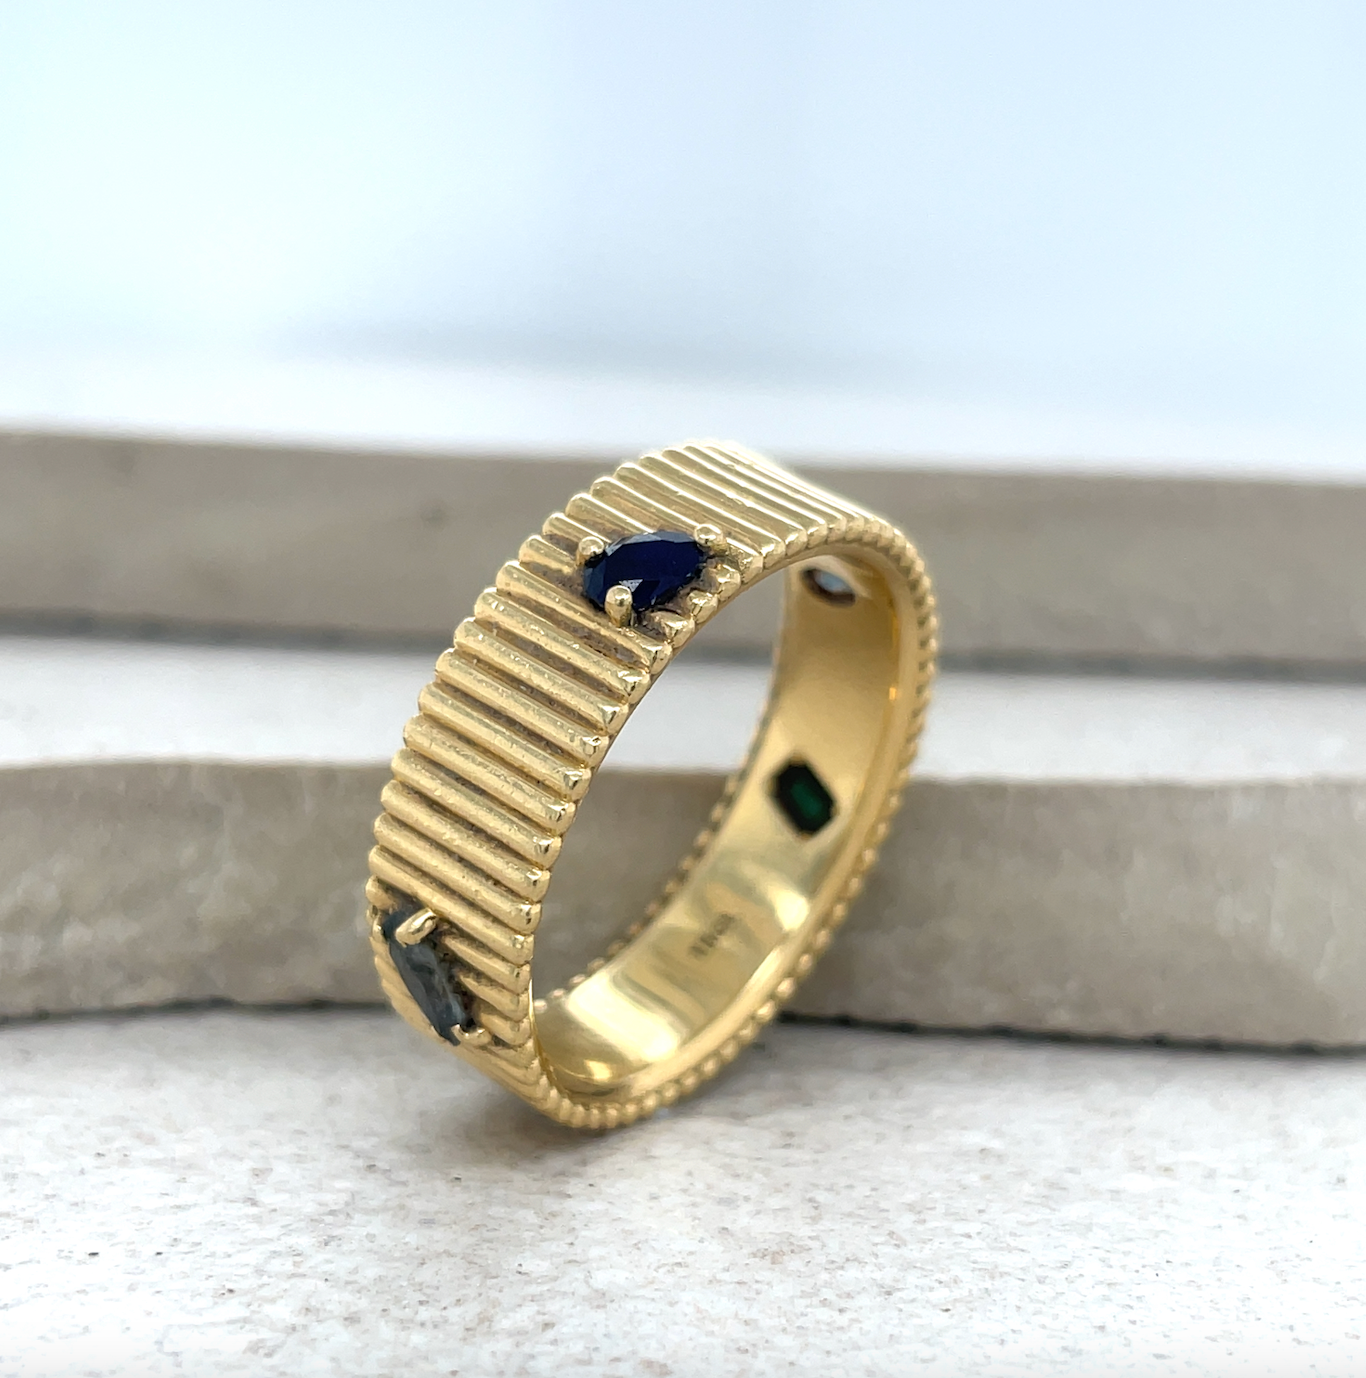 18ct Yellow Gold Ridged 6.5mm Band with Bead-Set Stones